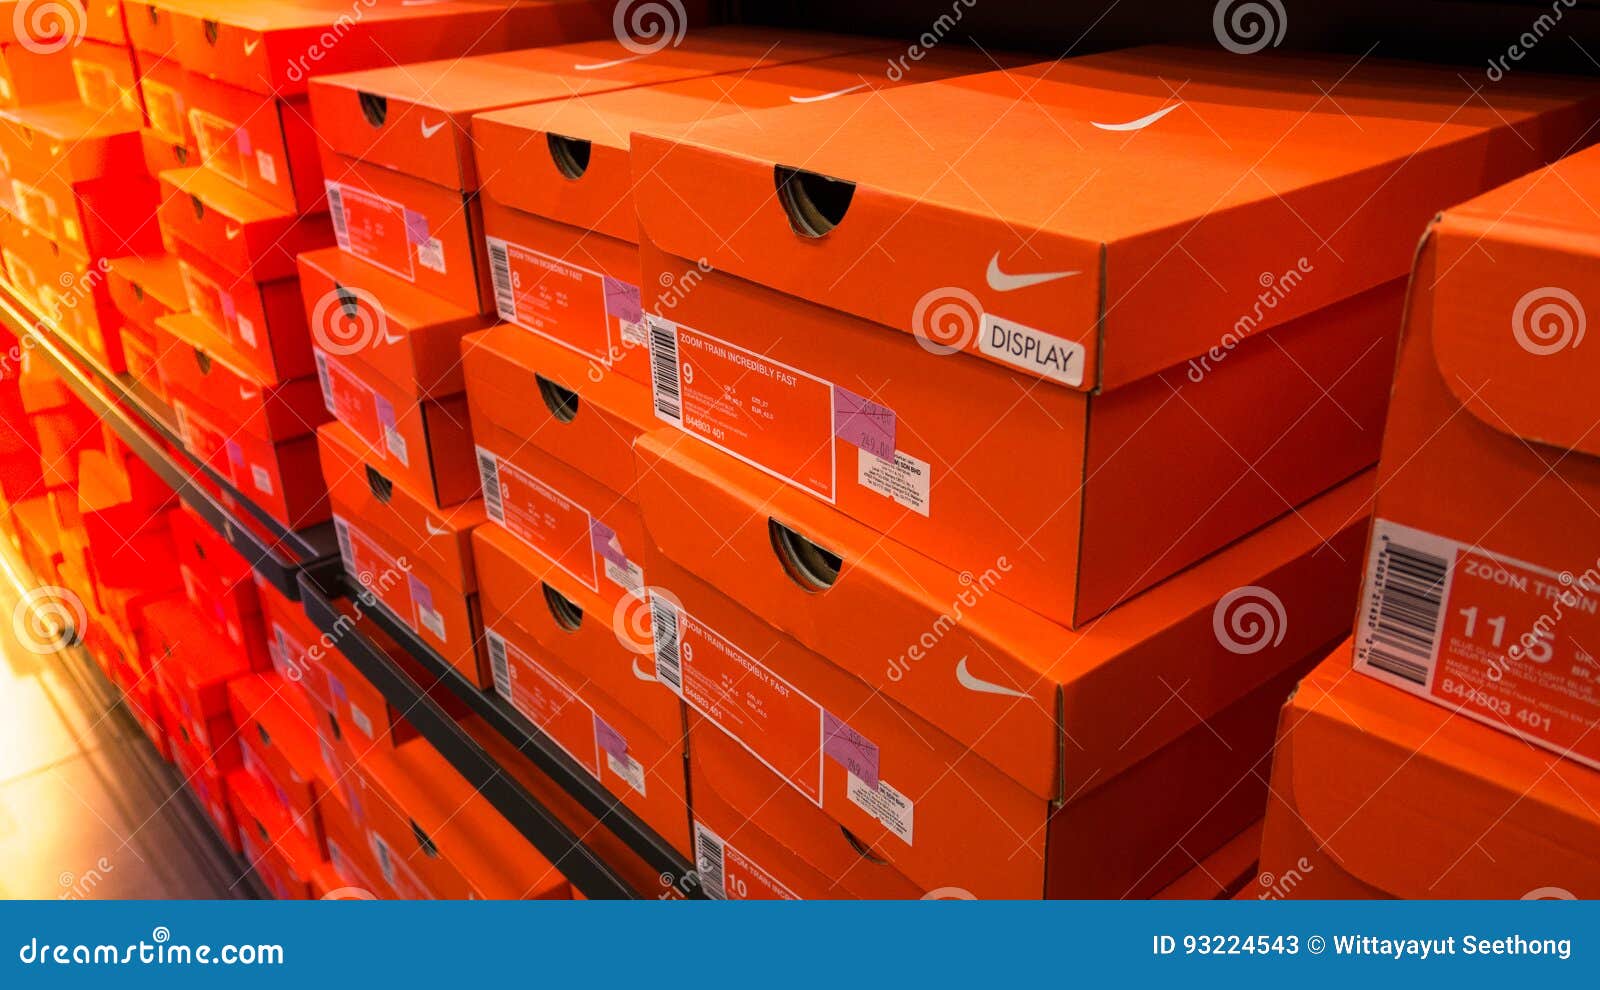 Background of Stacked Nike Shoes Boxes Editorial Stock Photo - Image of ...